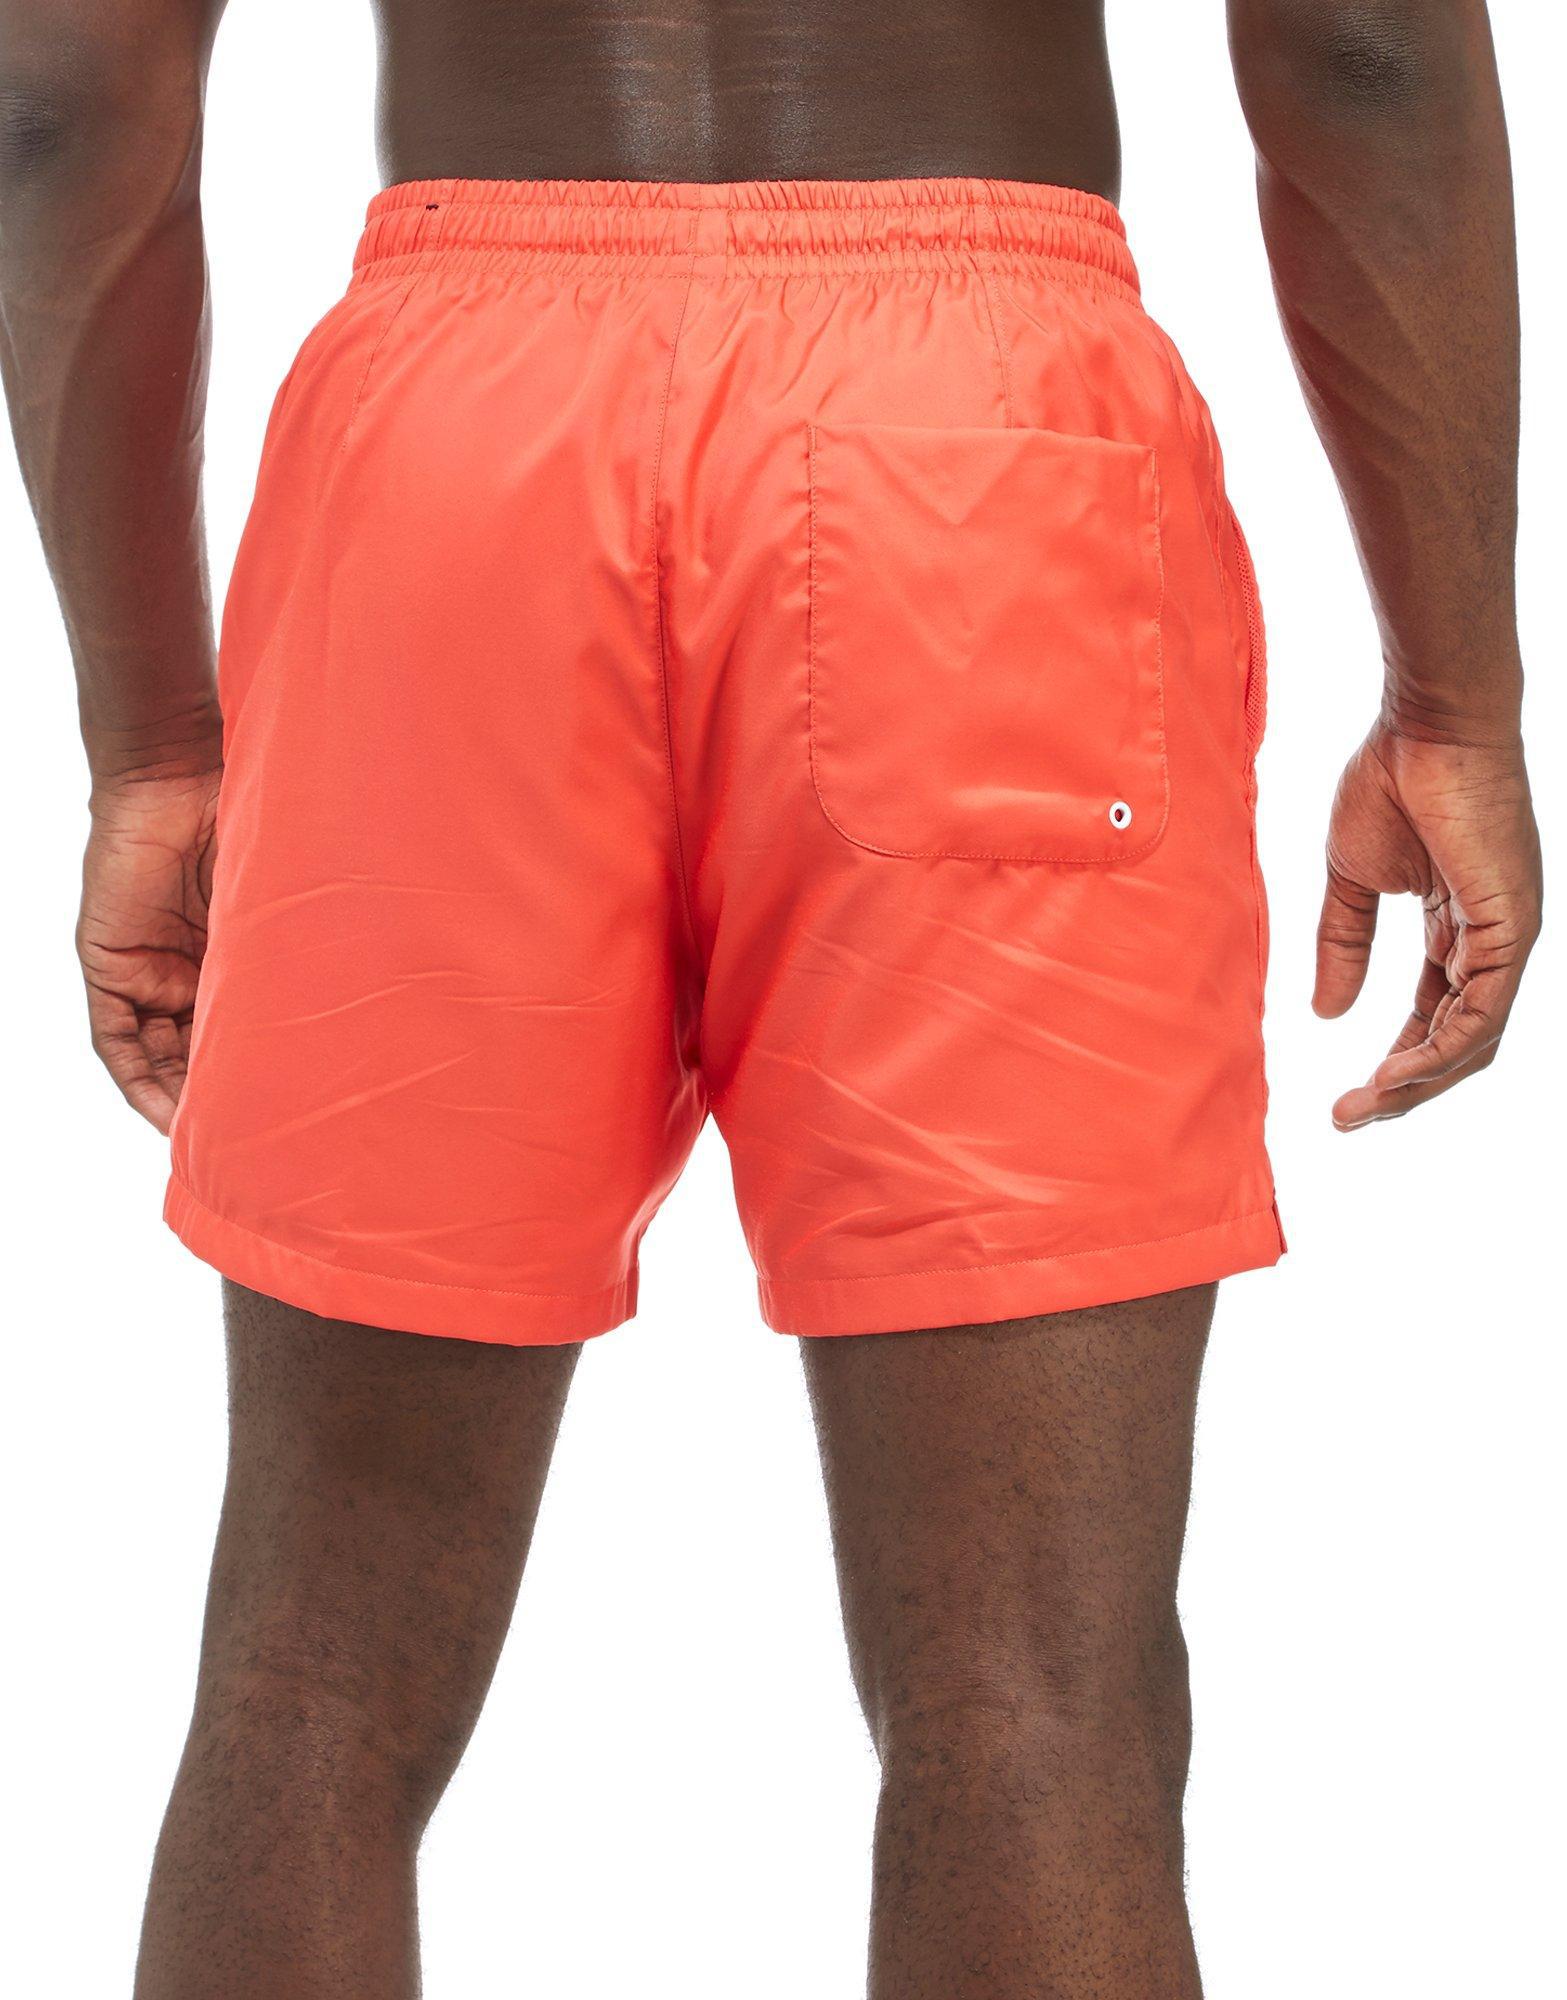 Nike Synthetic Flow Shorts in Red/White (Red) for Men - Lyst